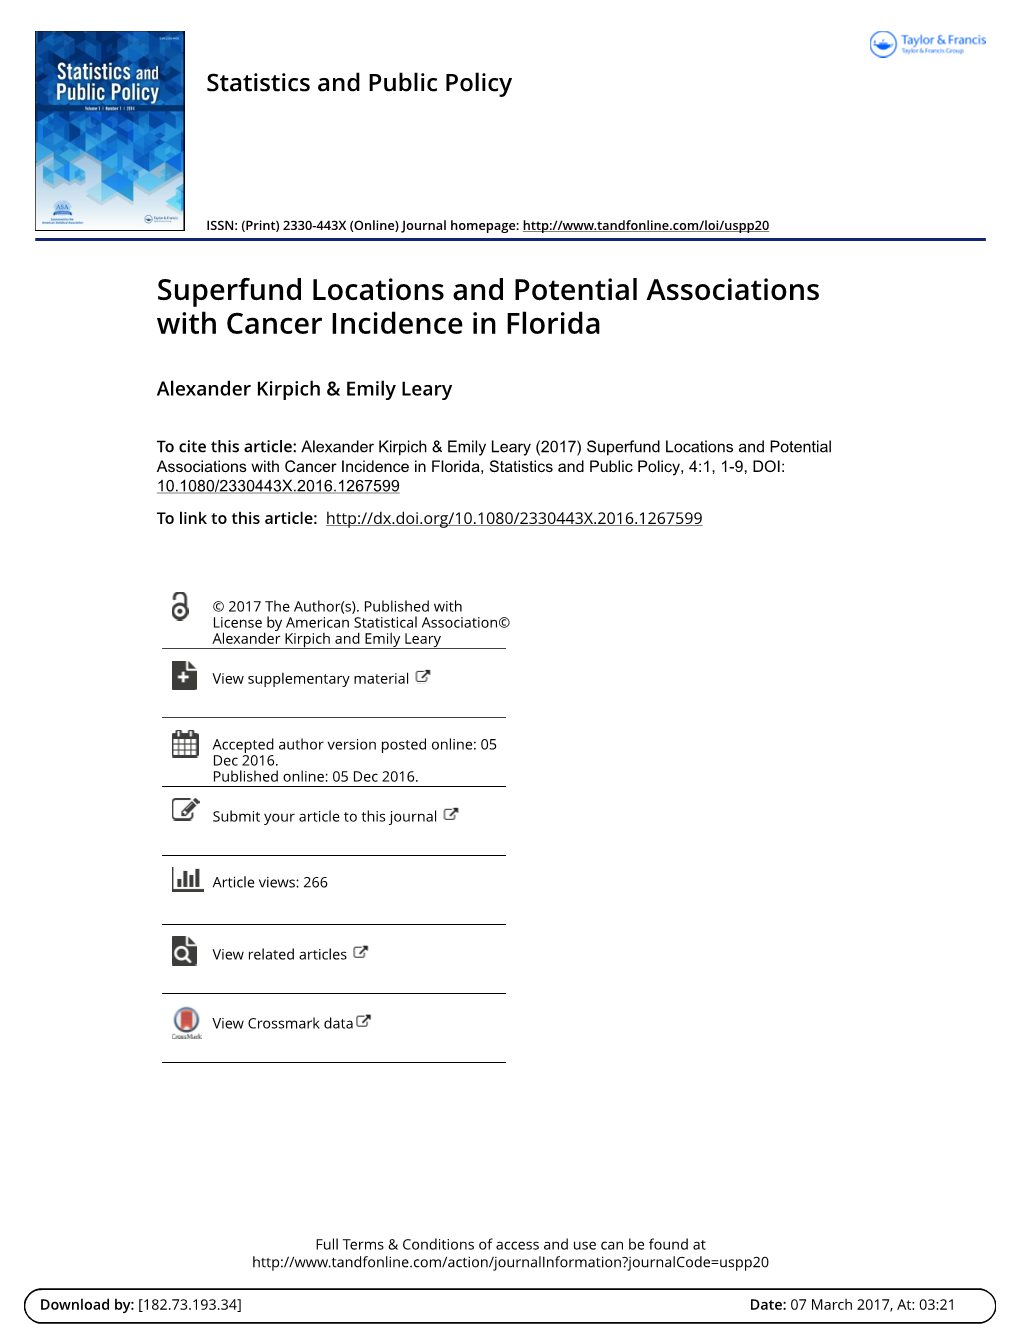 Superfund Locations and Potential Associations with Cancer Incidence in Florida